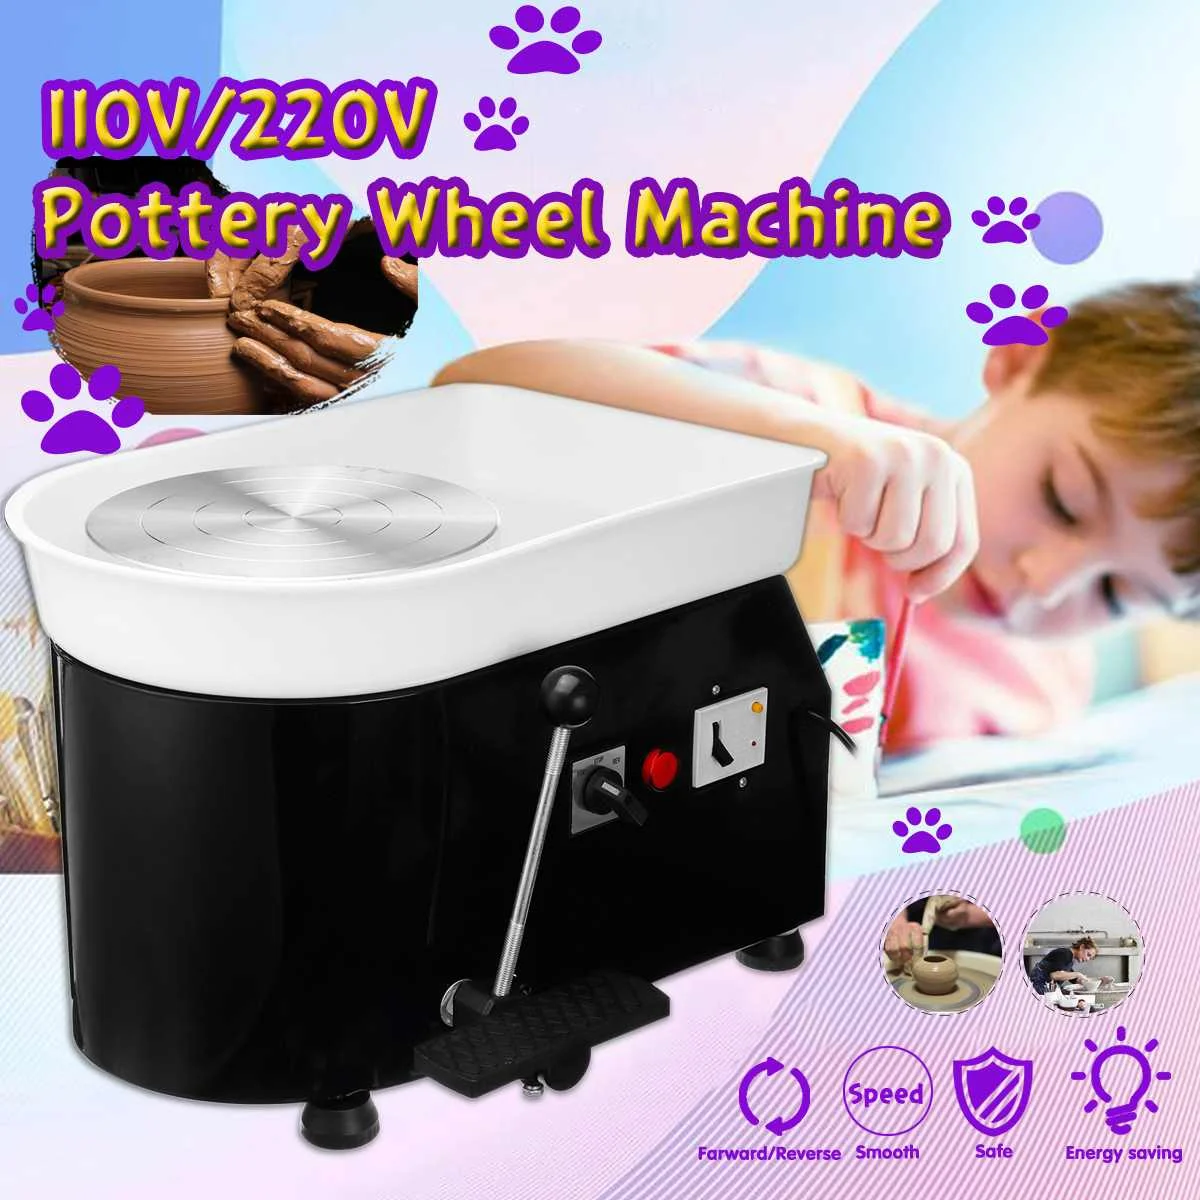 

Pottery Forming Machine 110V/220V 350W Electric Pottery Wheel DIY Clay Tool Tray Flexible Foot Pedal For Ceramic Work Ceramics